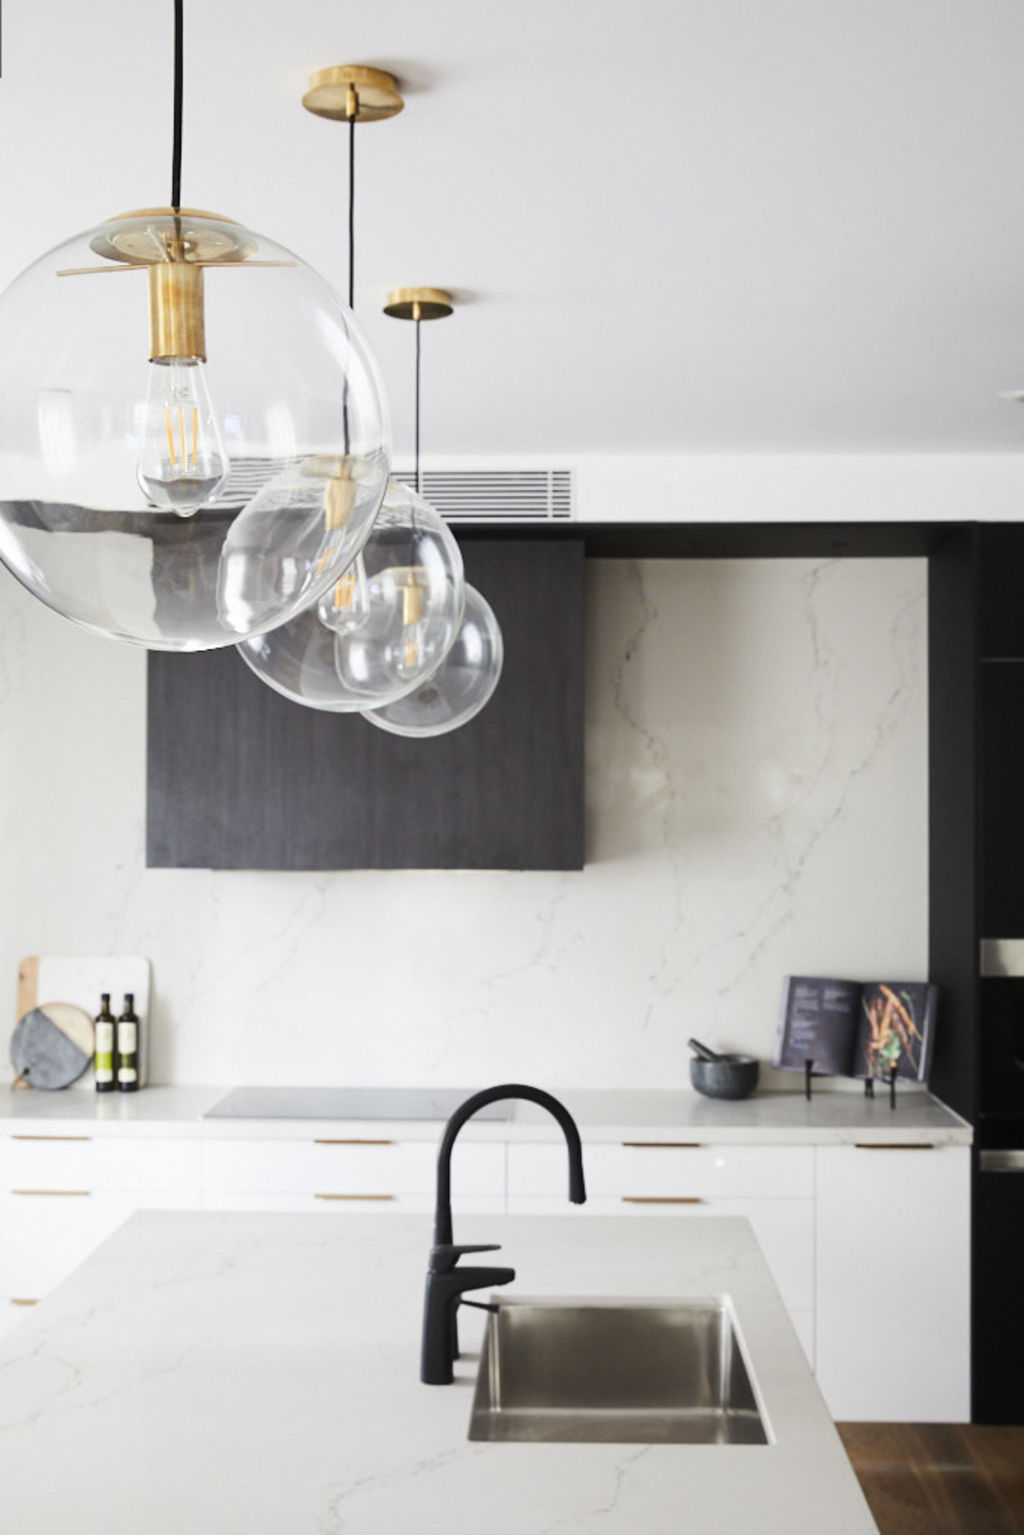 The judges loved the structural range hood. Photo: Channel Nine Photo: Channel Nine